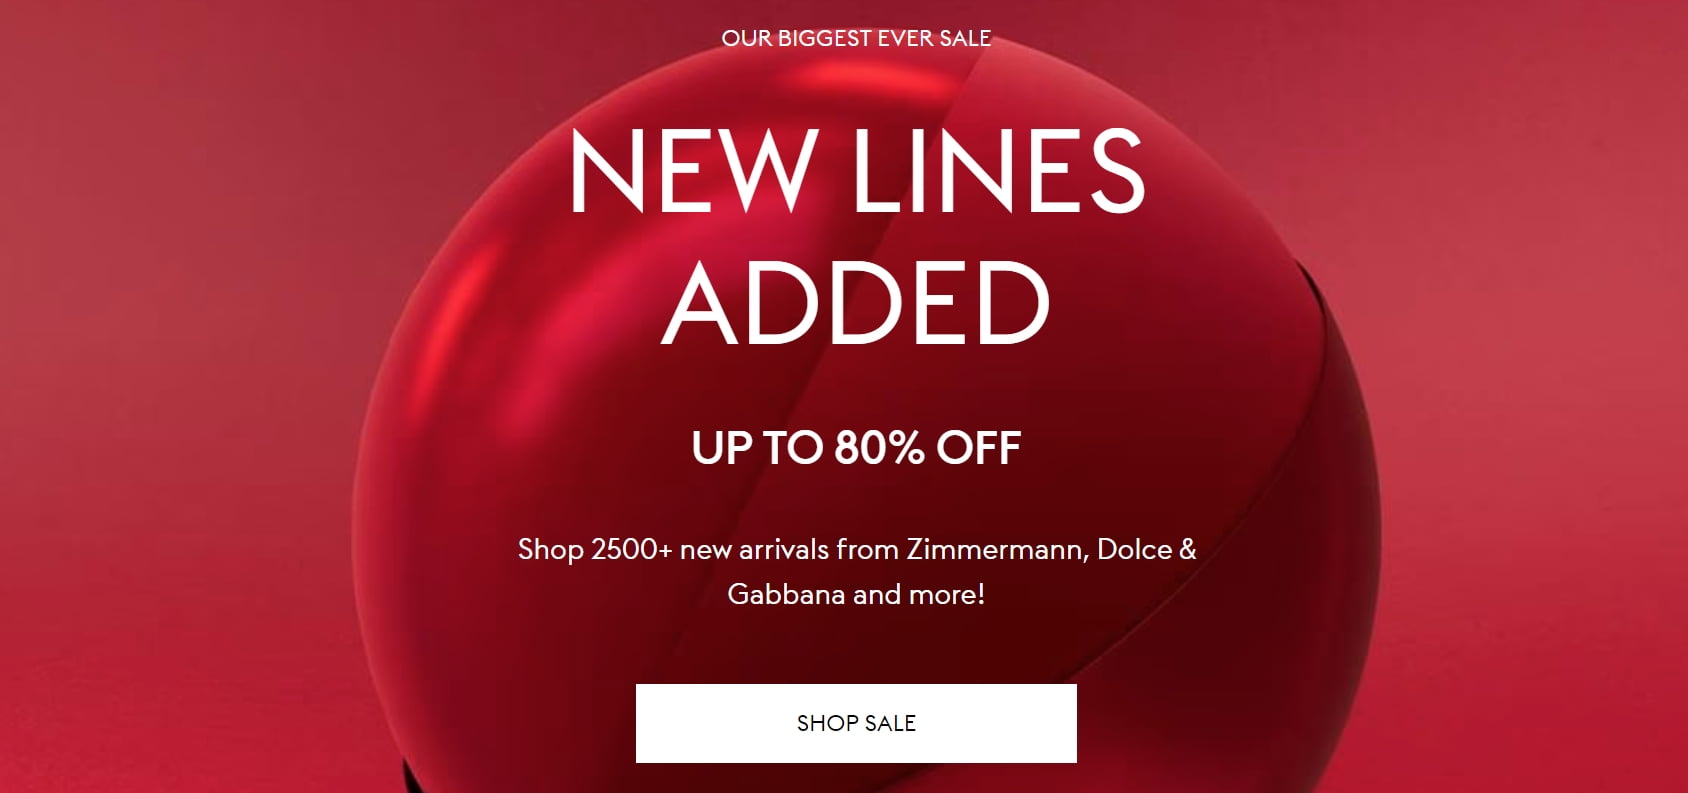 Up to 80% off selected items at TheOutnet. New lines added